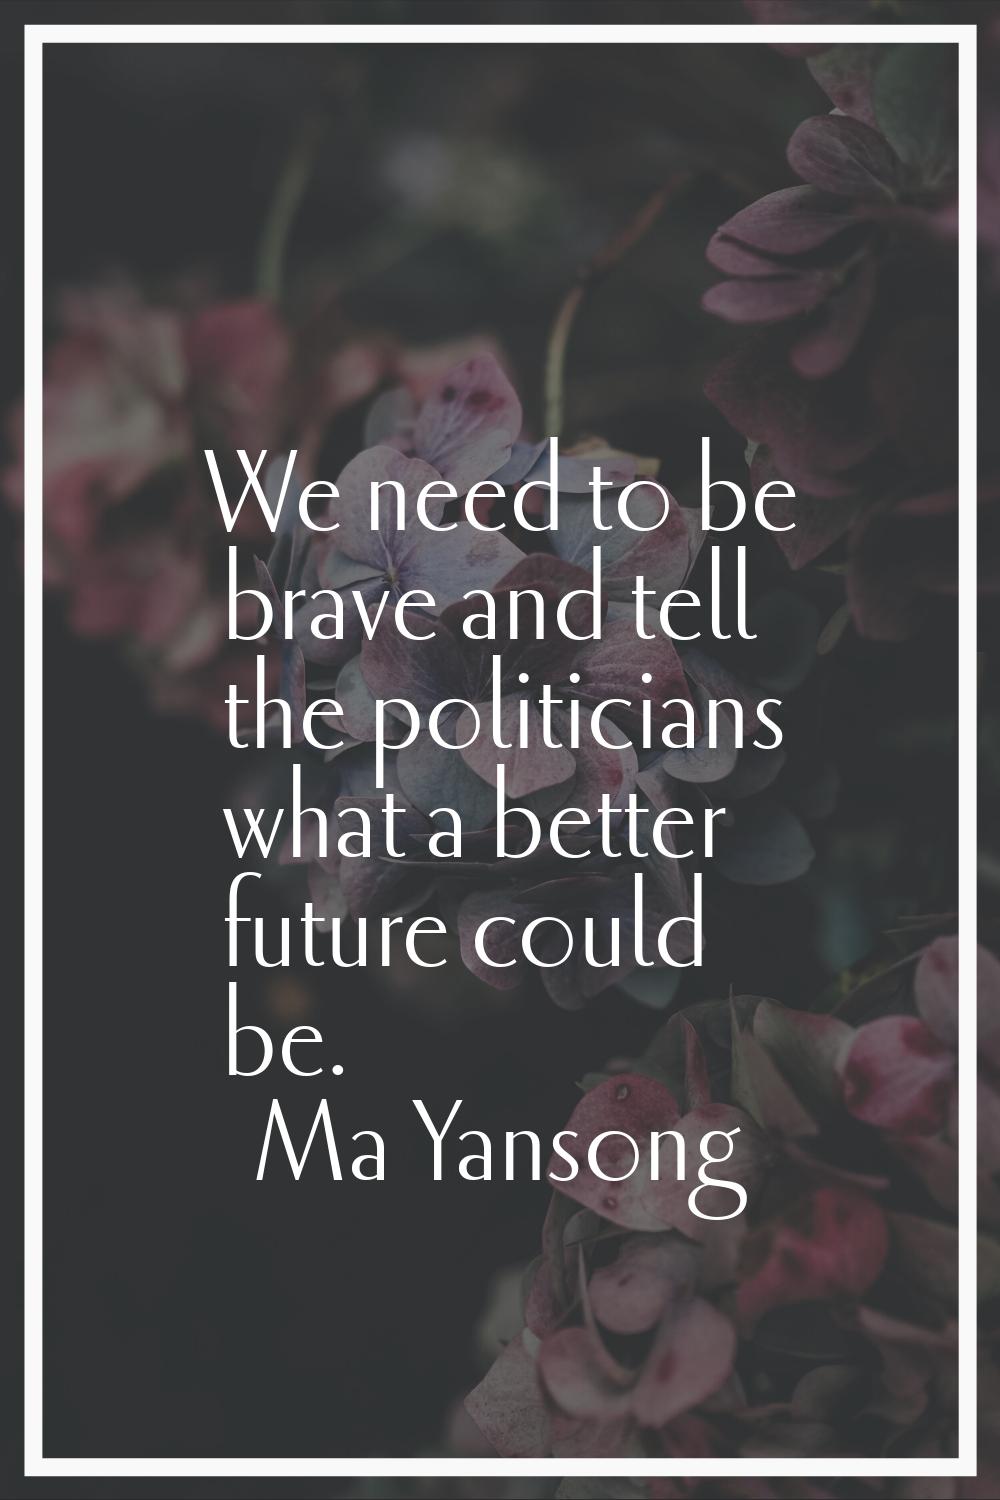 We need to be brave and tell the politicians what a better future could be.